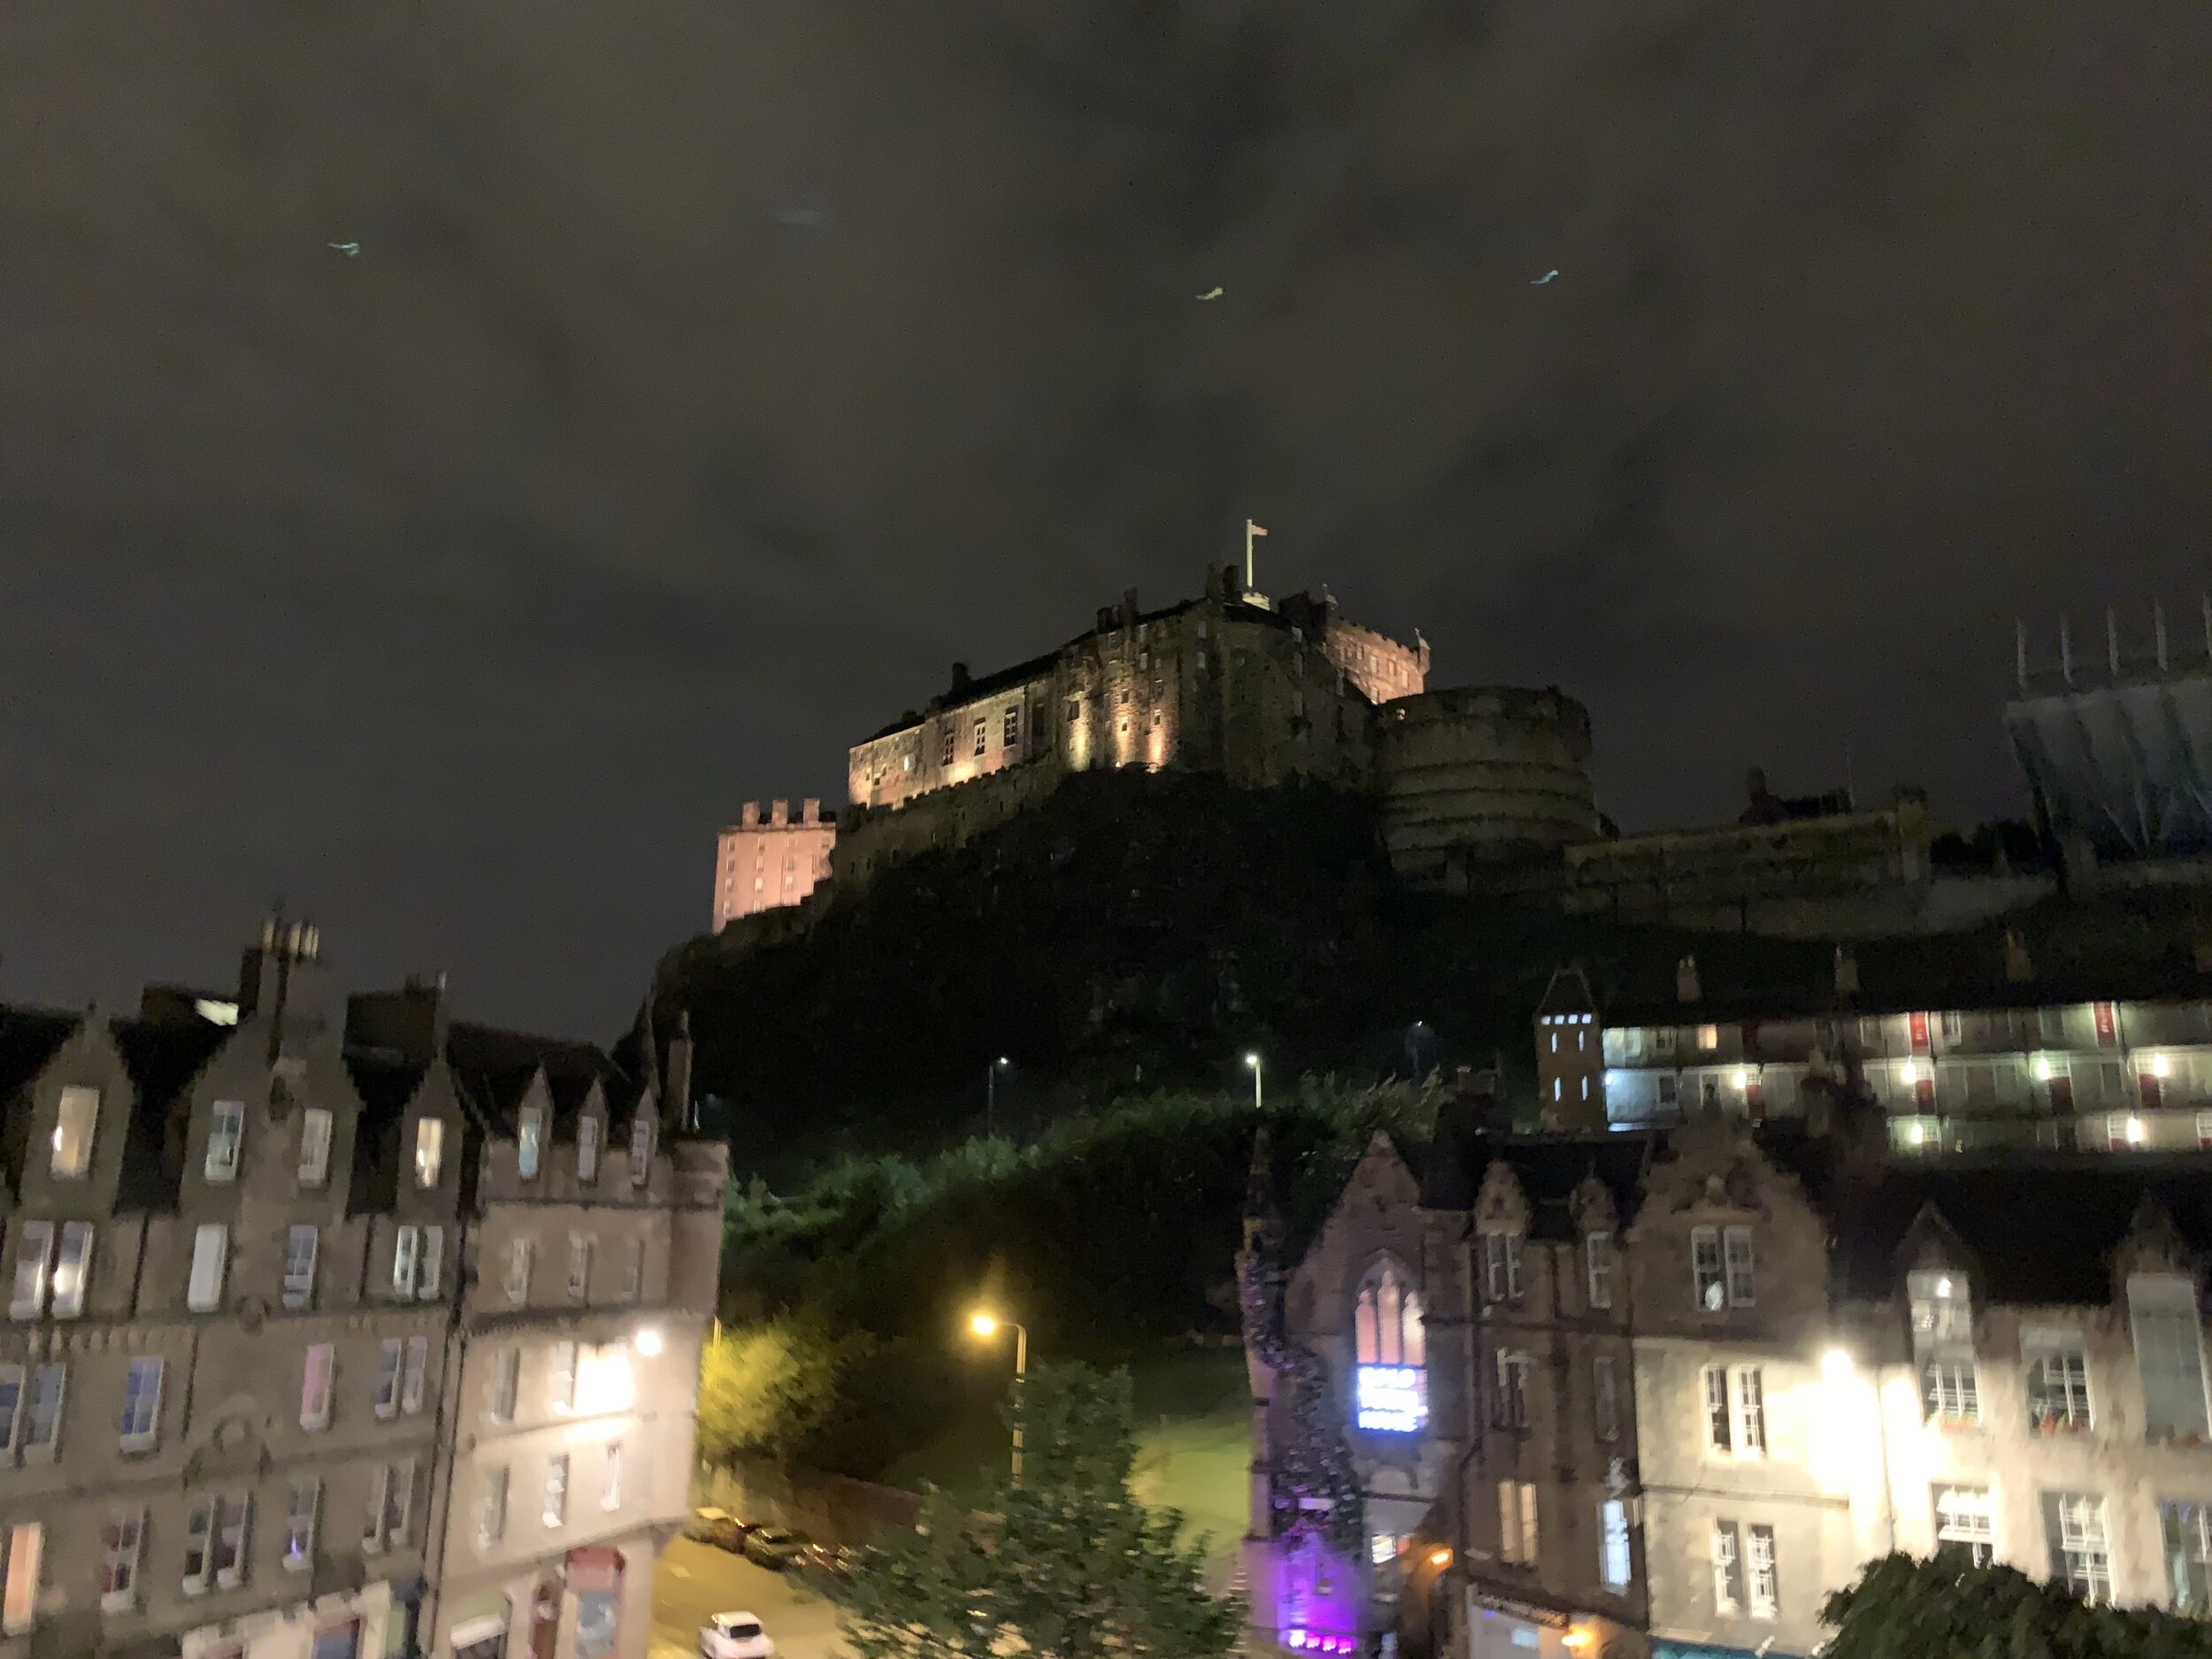 View of Edinburgh Castle from the Airbnb